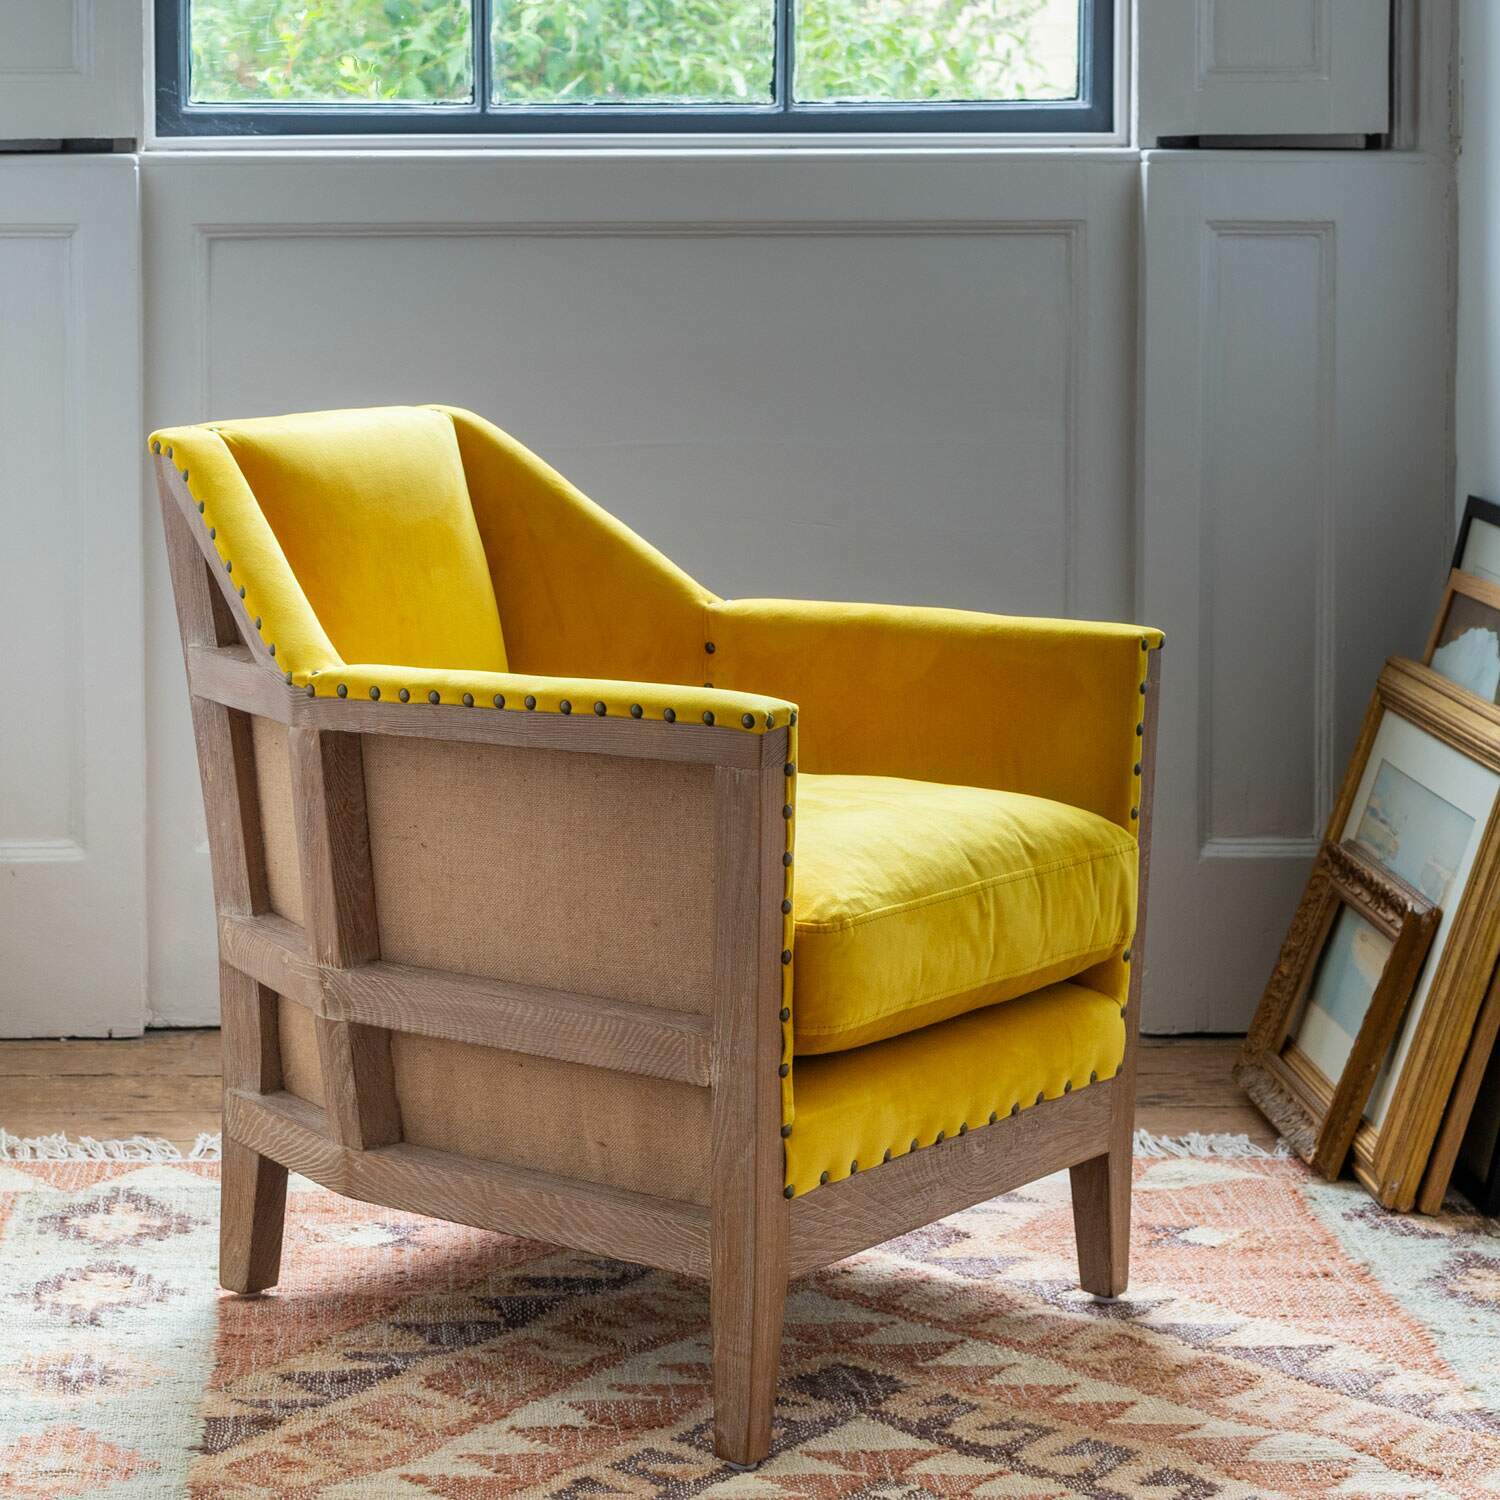 Read more about Graham and green hoxton yellow velvet armchair